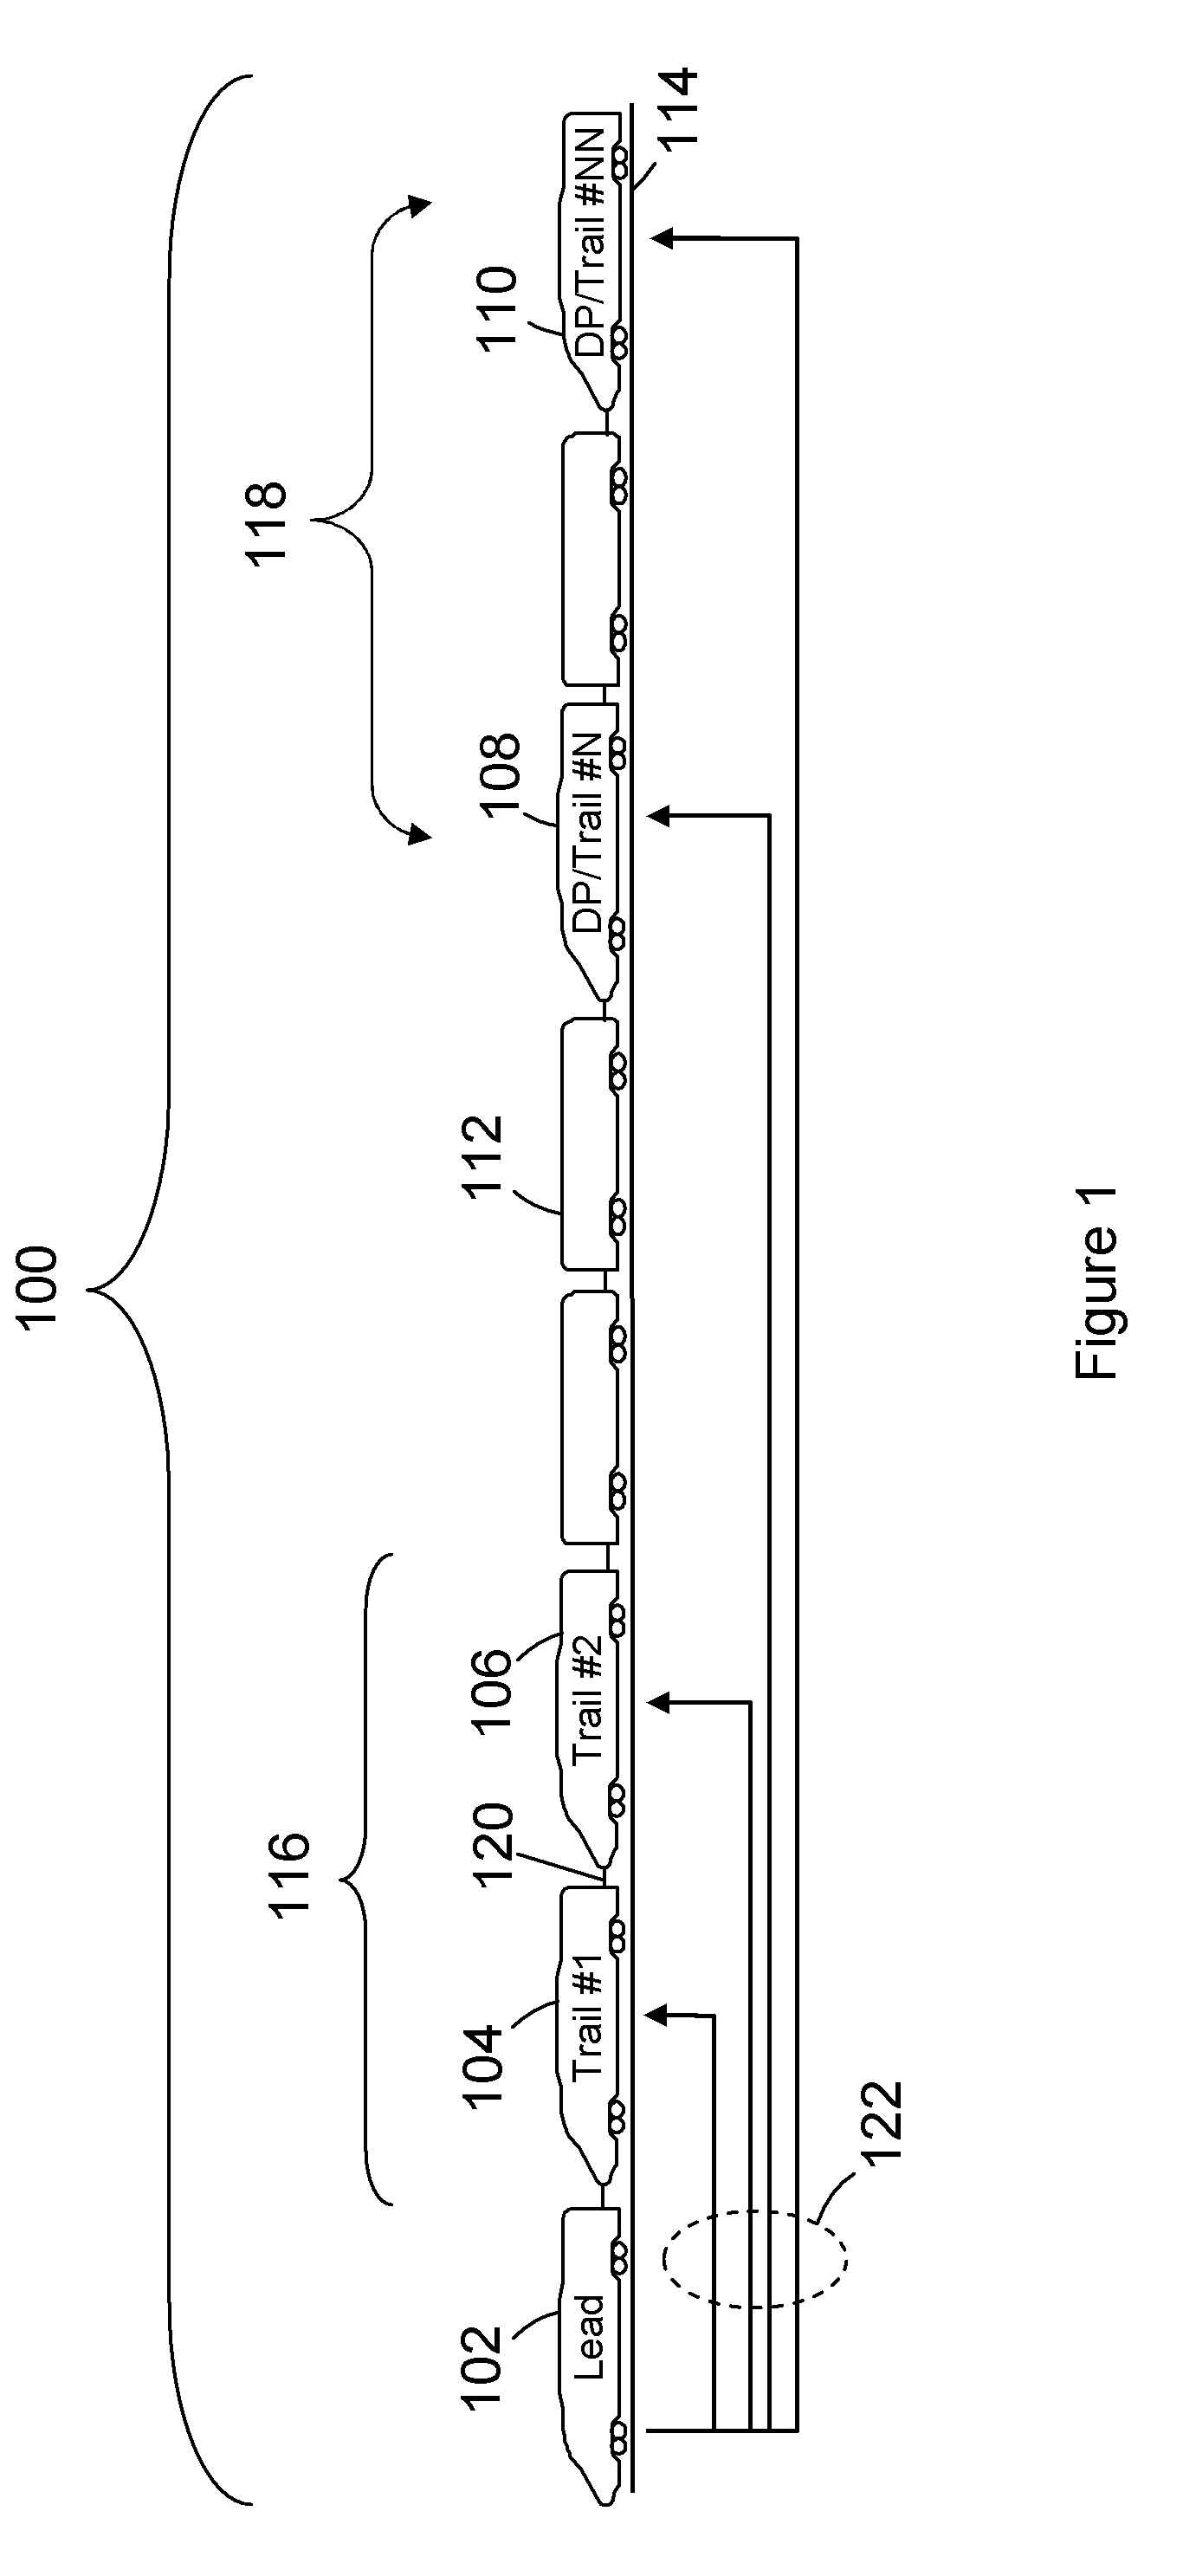 Control system and method for remotely isolating powered units in a rail vehicle system